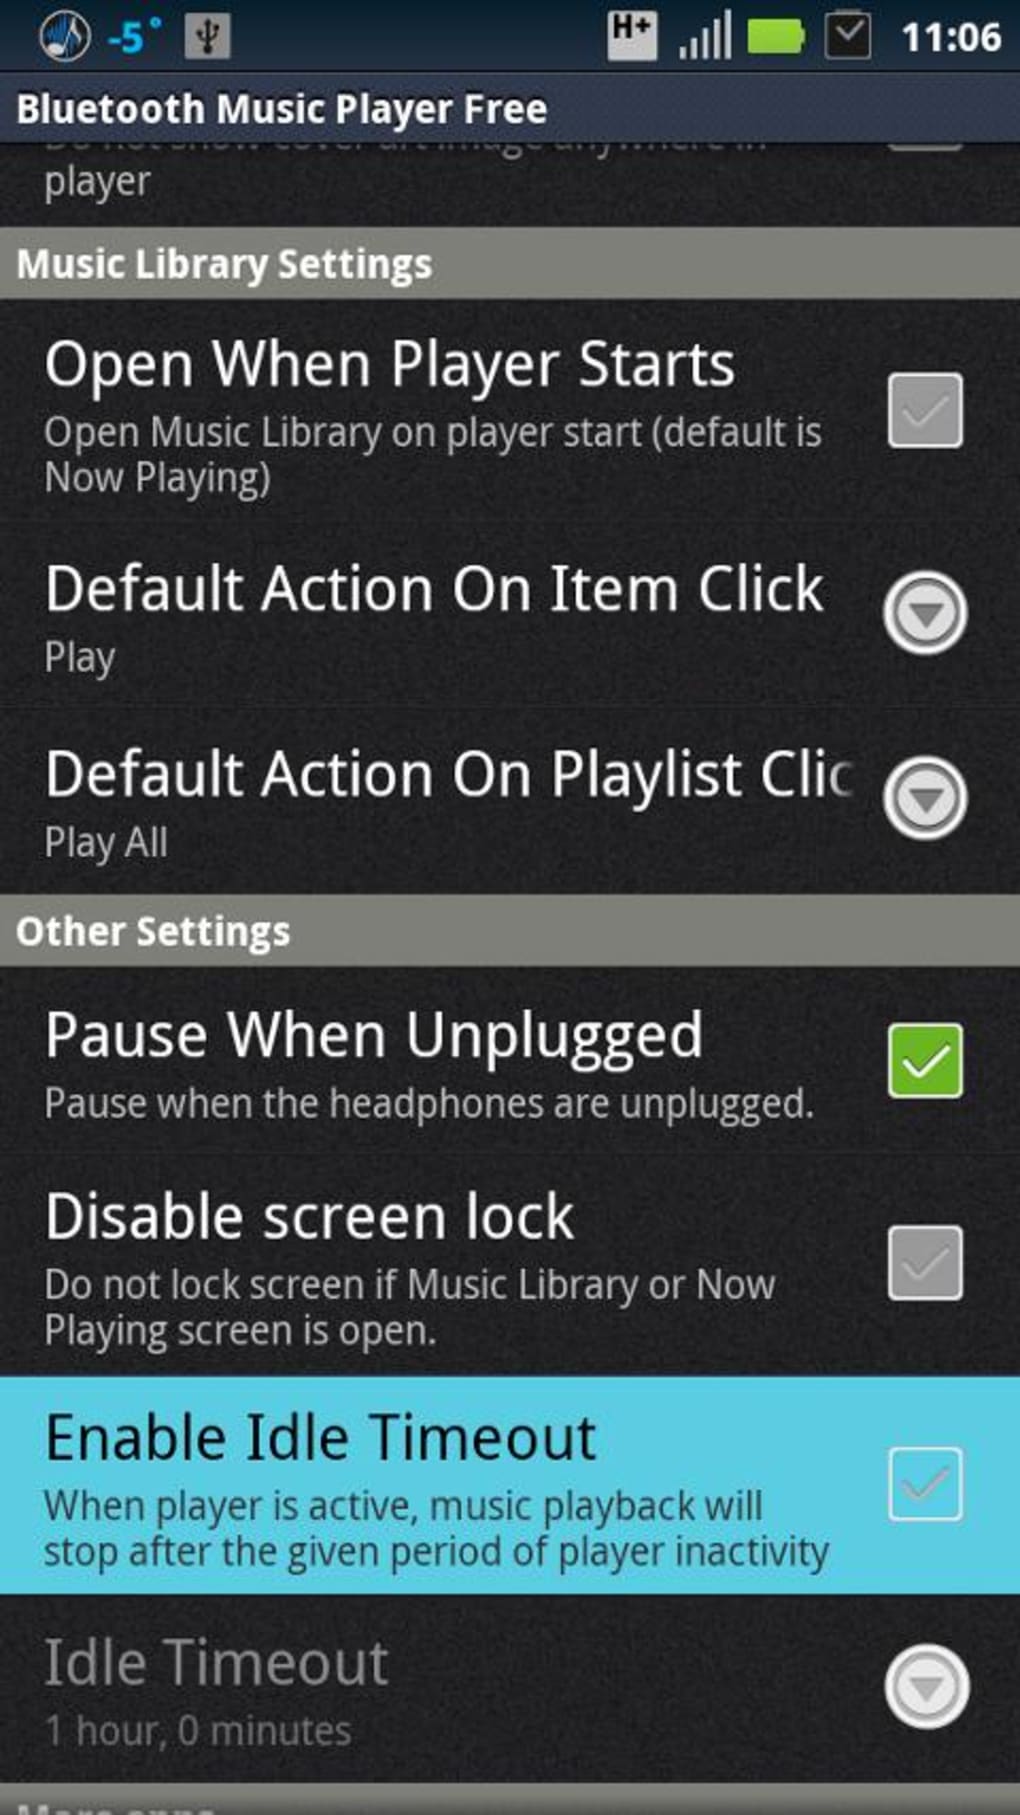 Bluetooth Music Player Free APK for Android - Download